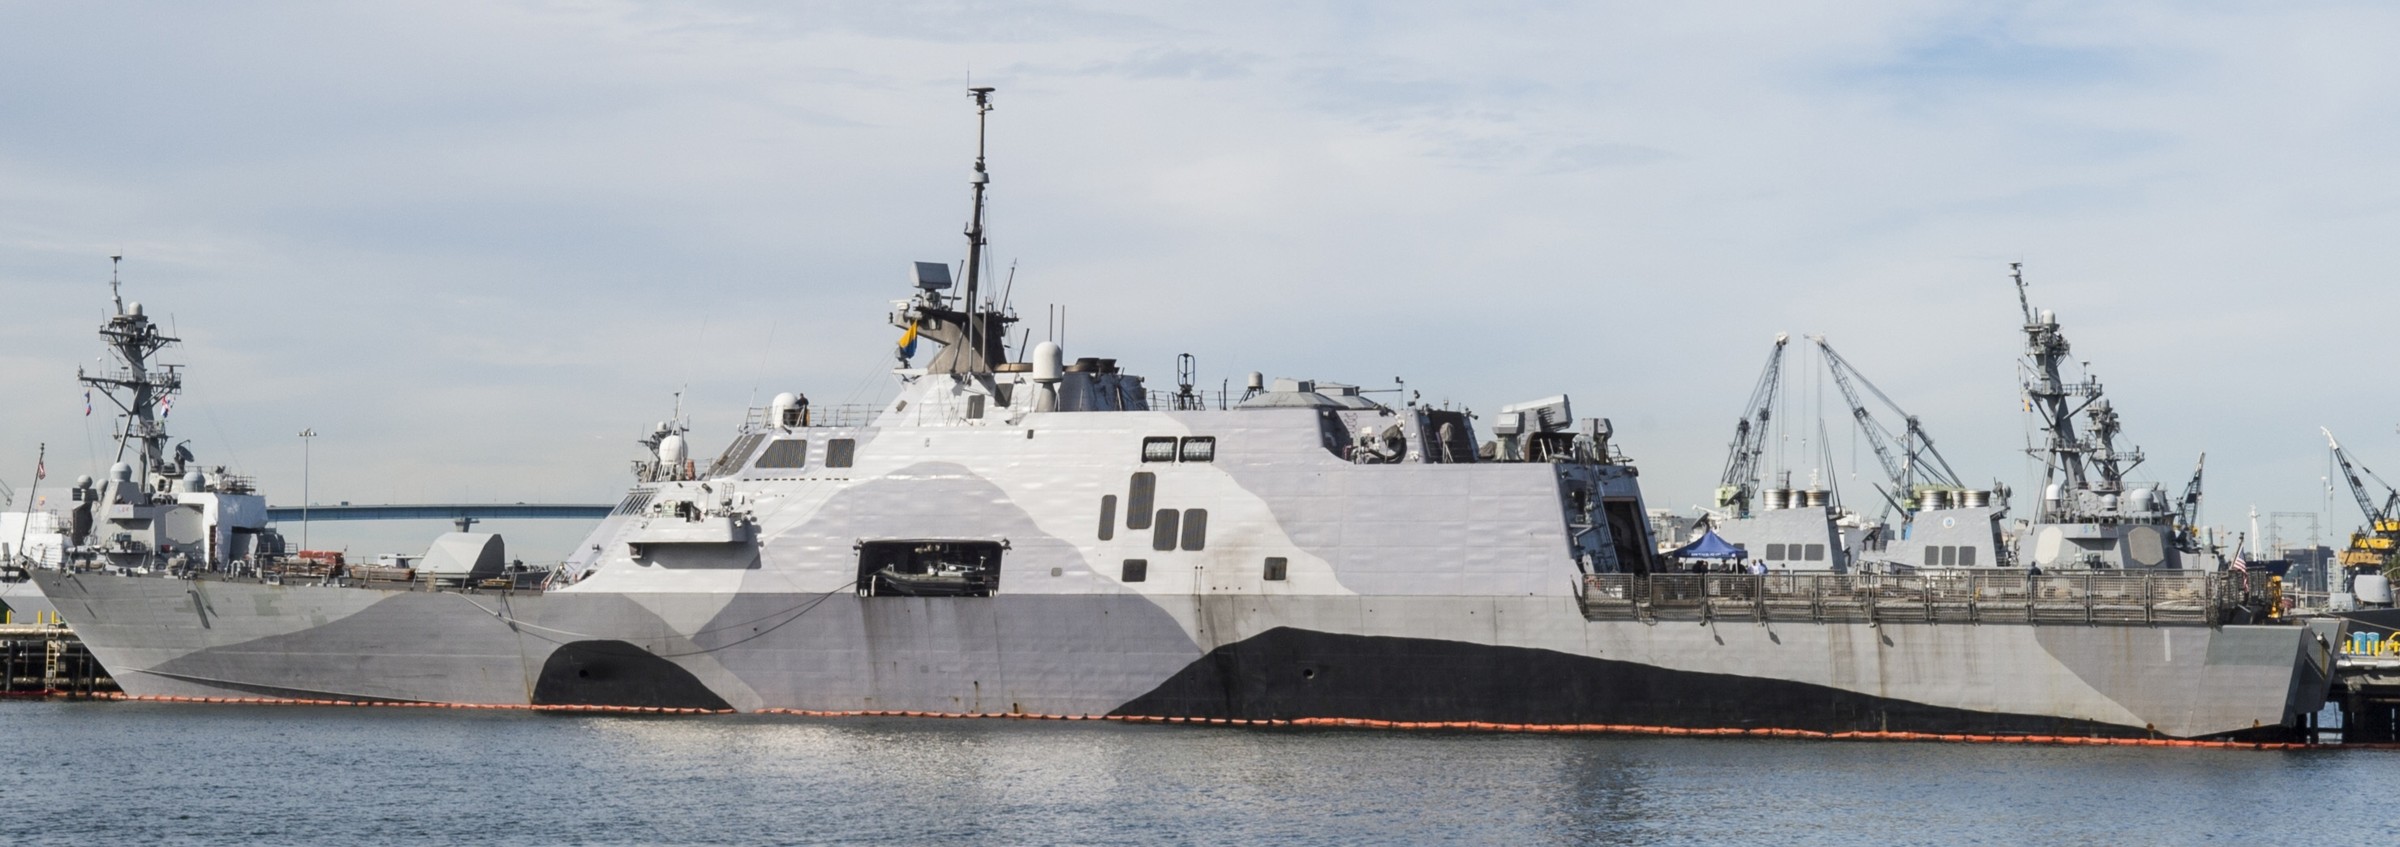 lcs-1 uss freedom class littoral combat ship us navy 164